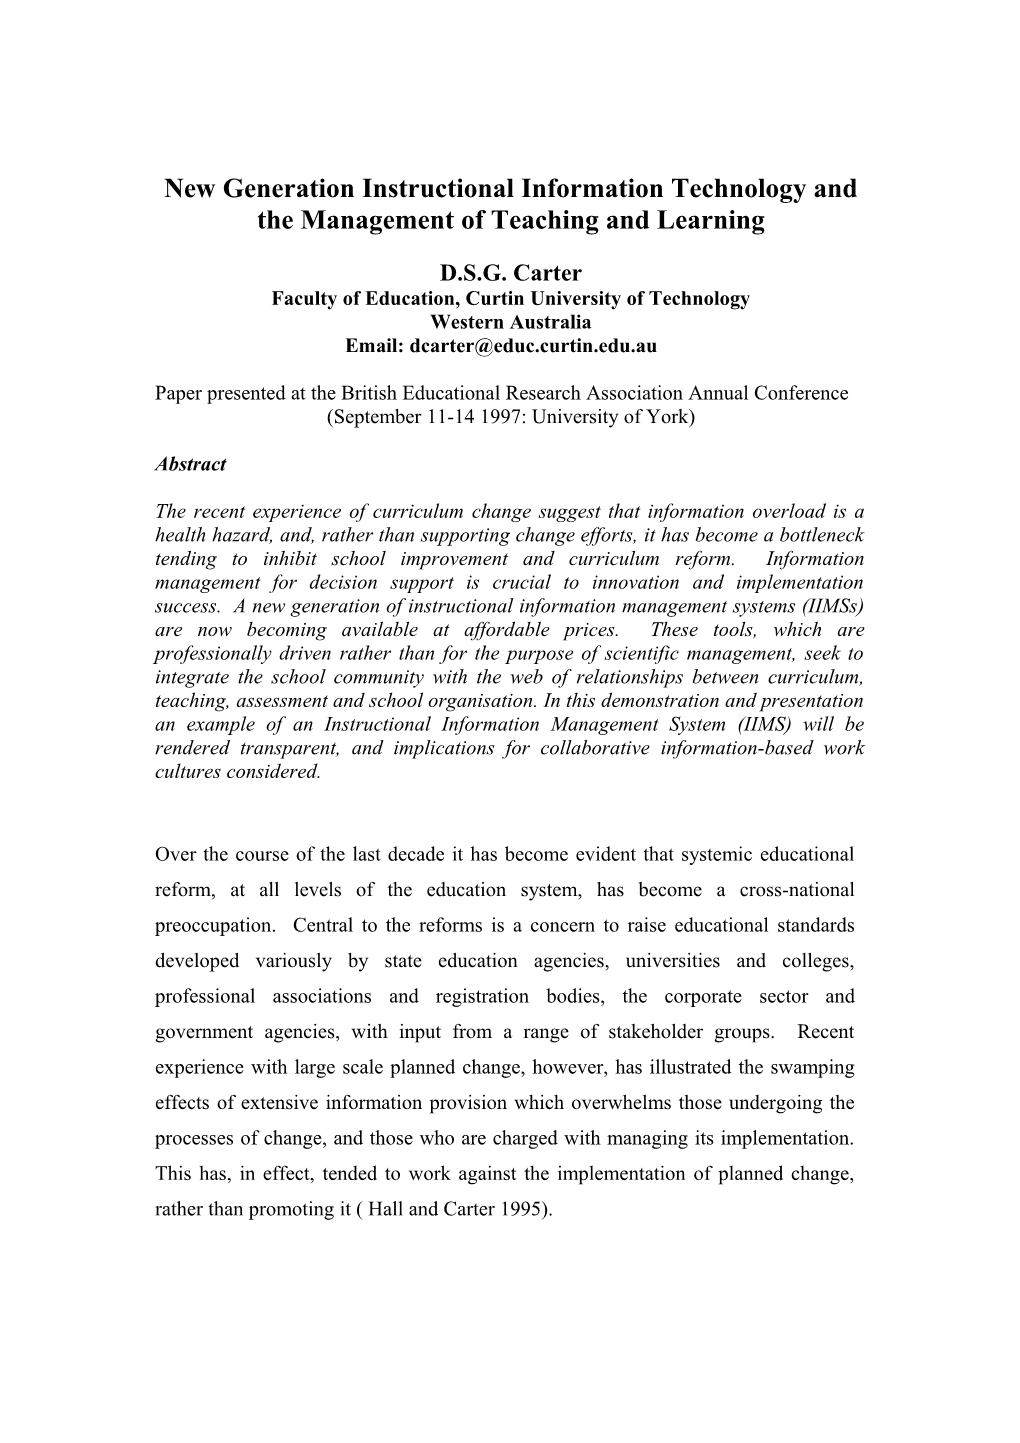 New Generation Instructional Information Technology and the Management of Teaching and Learning